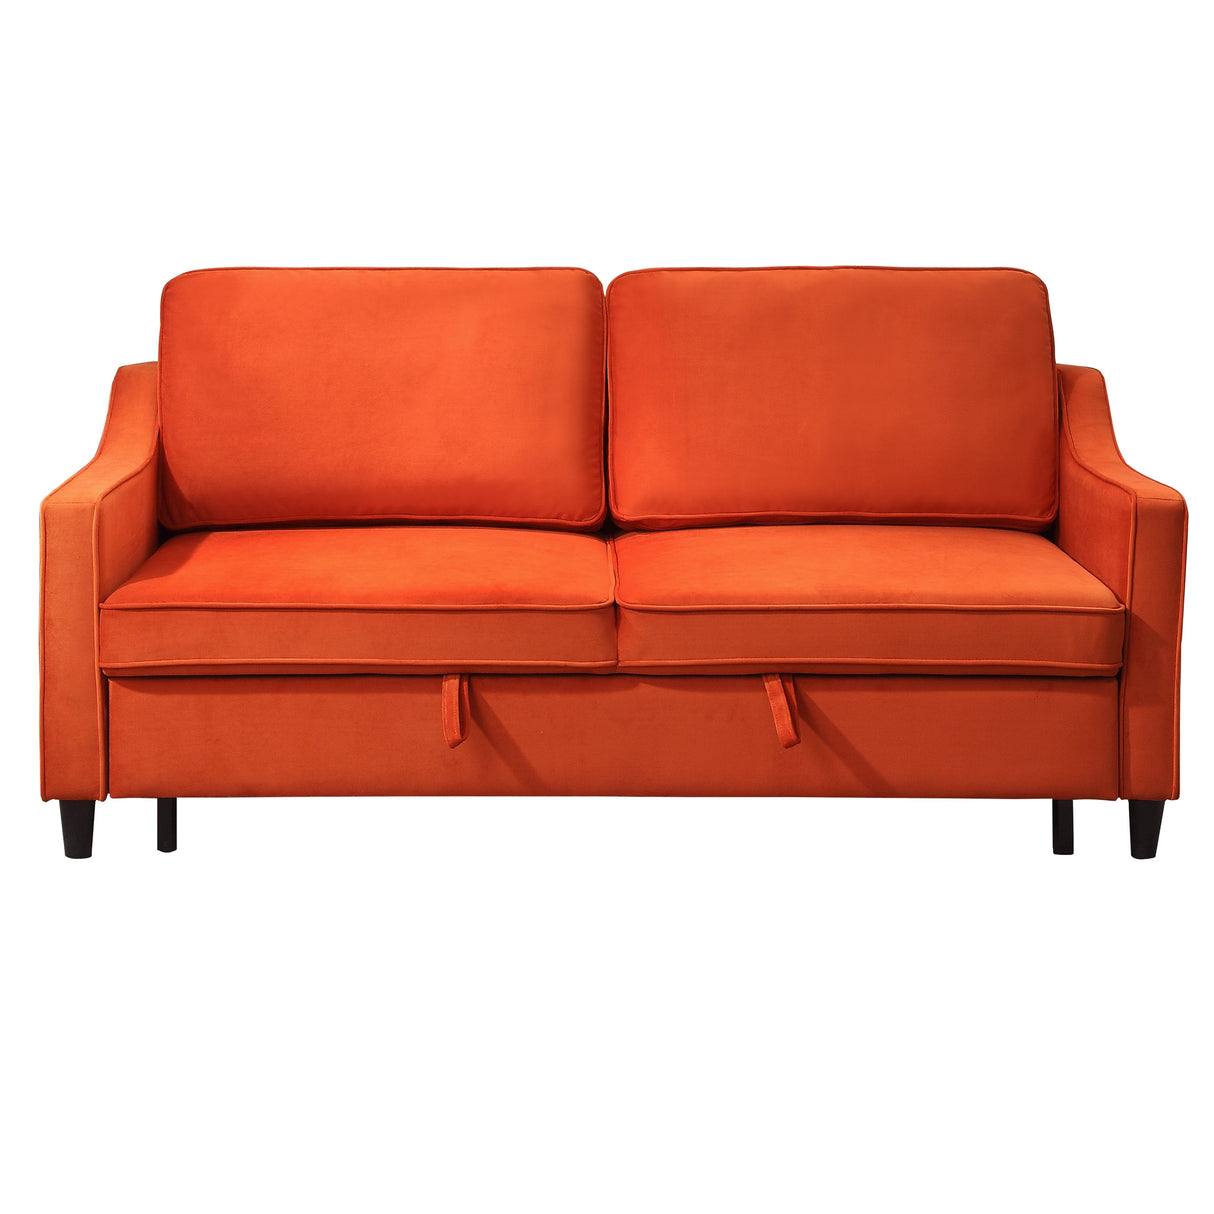 Adelia Orange Convertible Studio Sofa With Pull-Out Bed